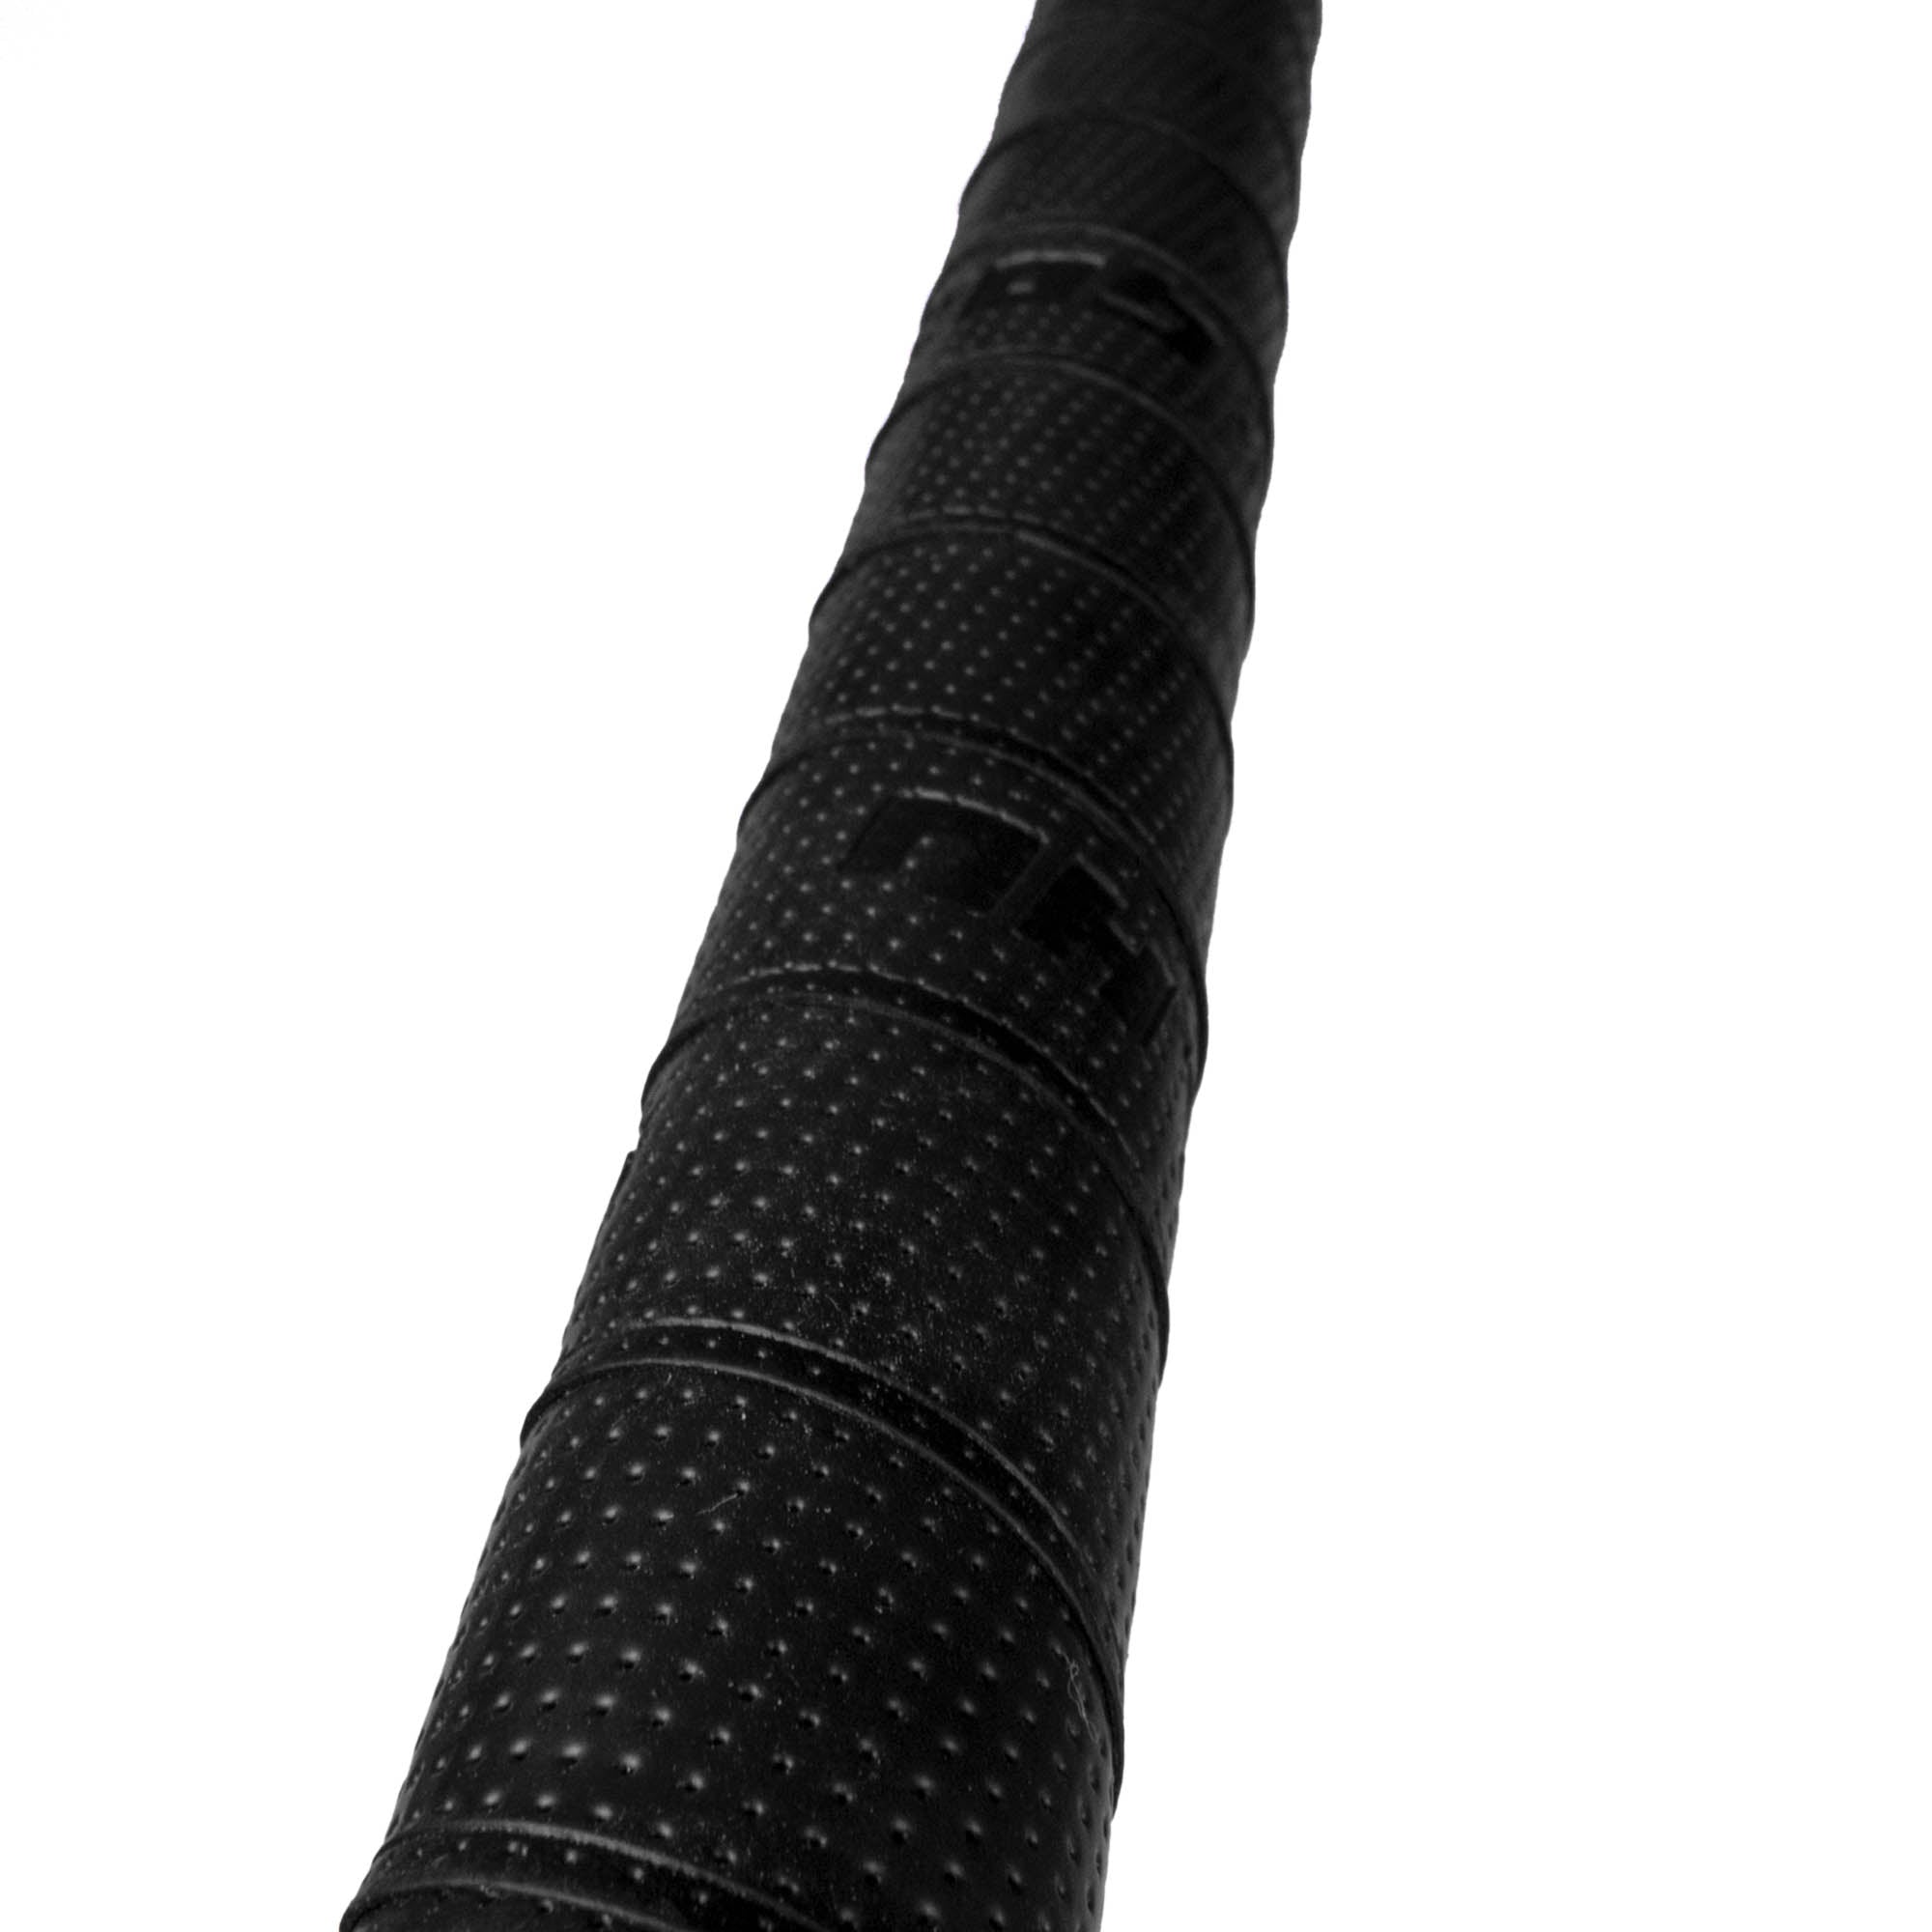 Close up of the staff grip